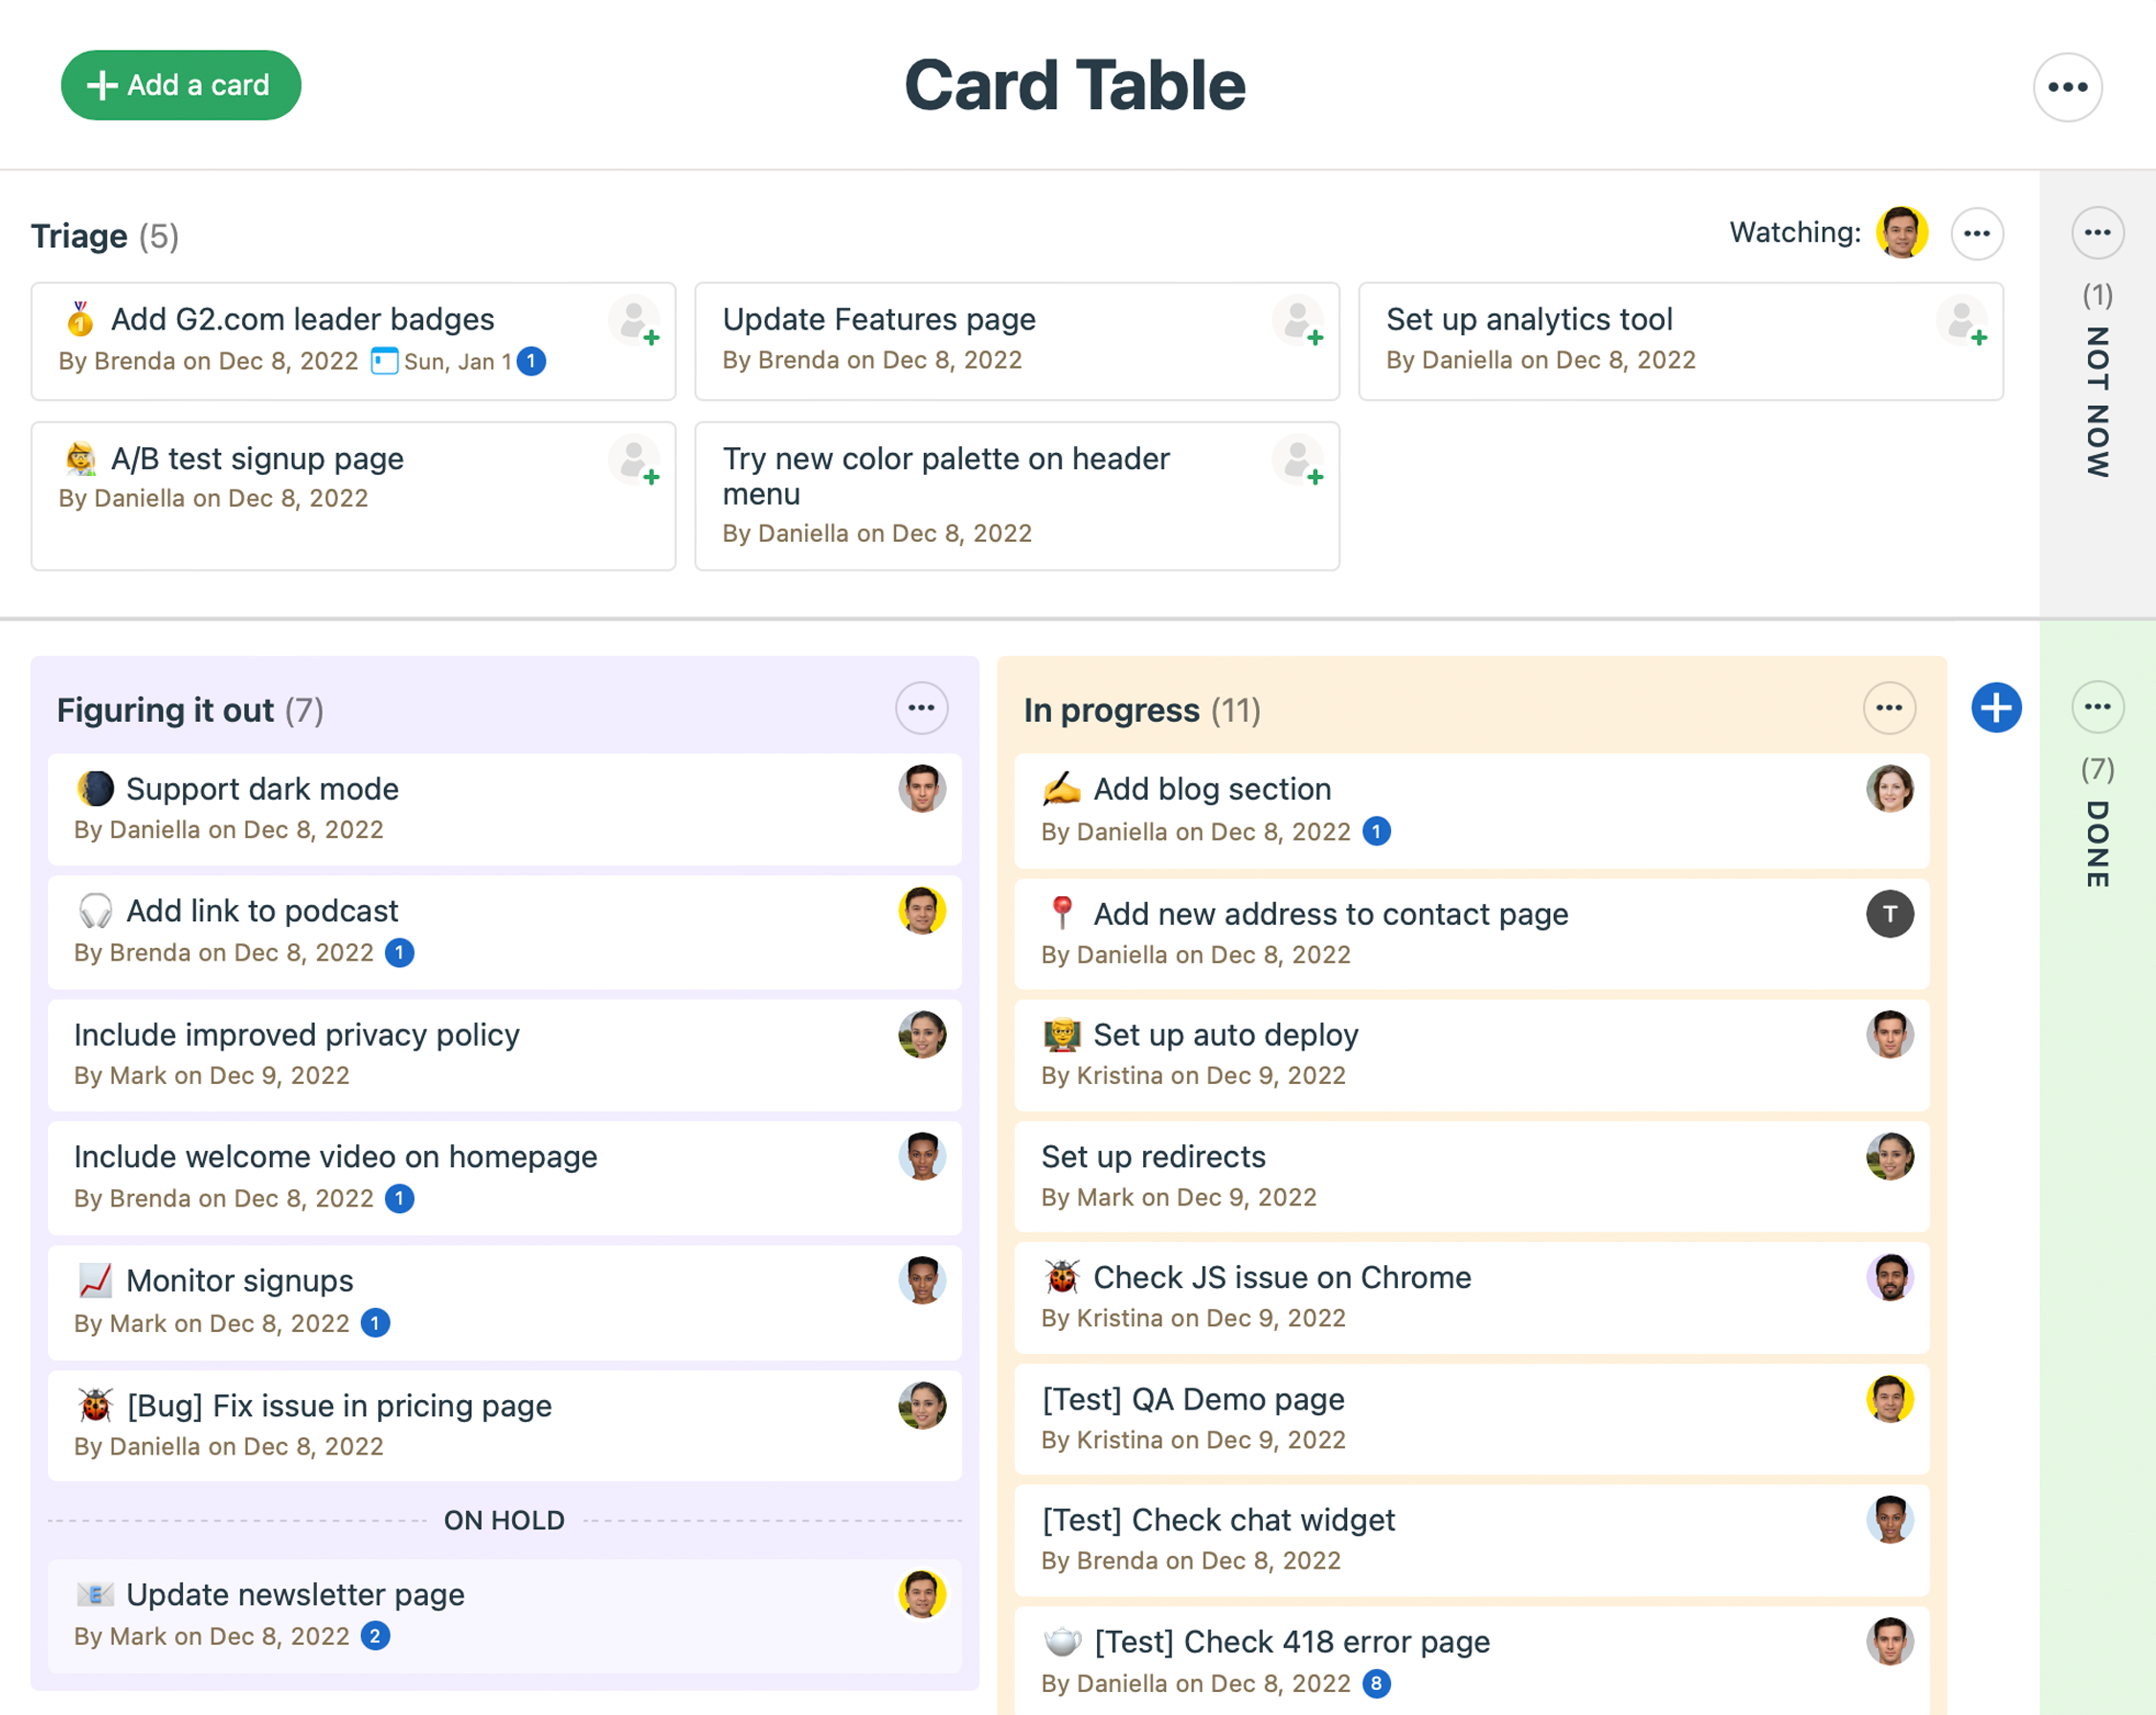 Kanban board via the Card Table layout example for a website redesign project with Basecamp software